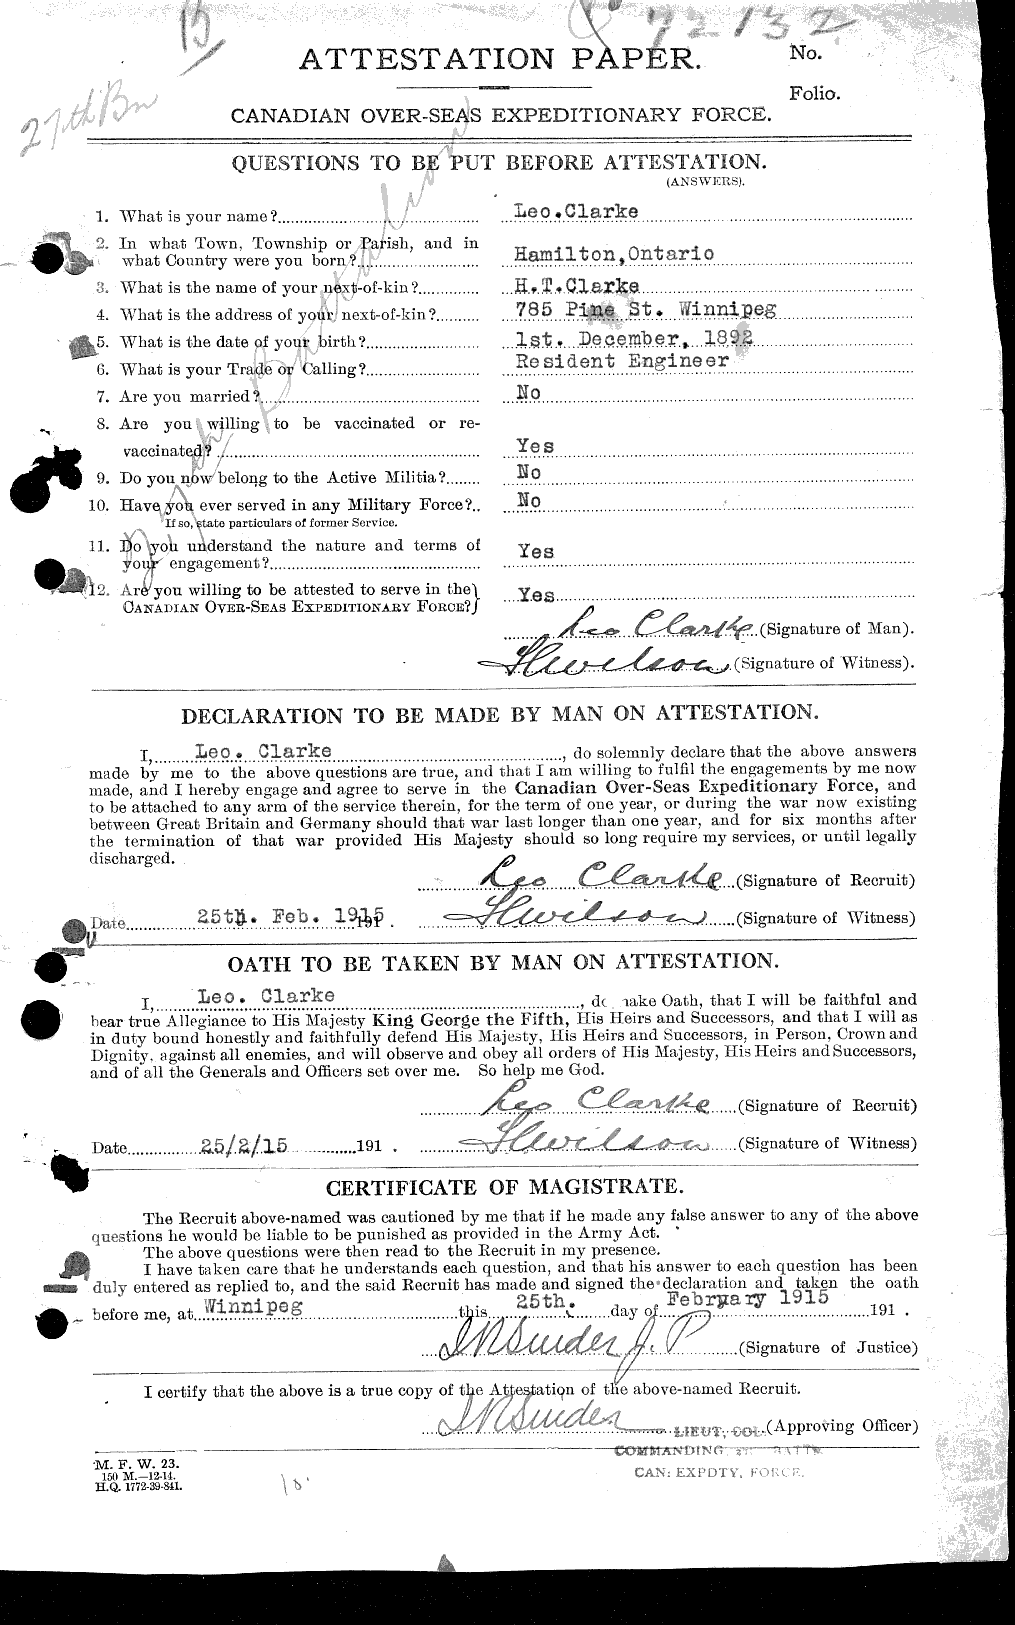 Personnel Records of the First World War - CEF 018601a